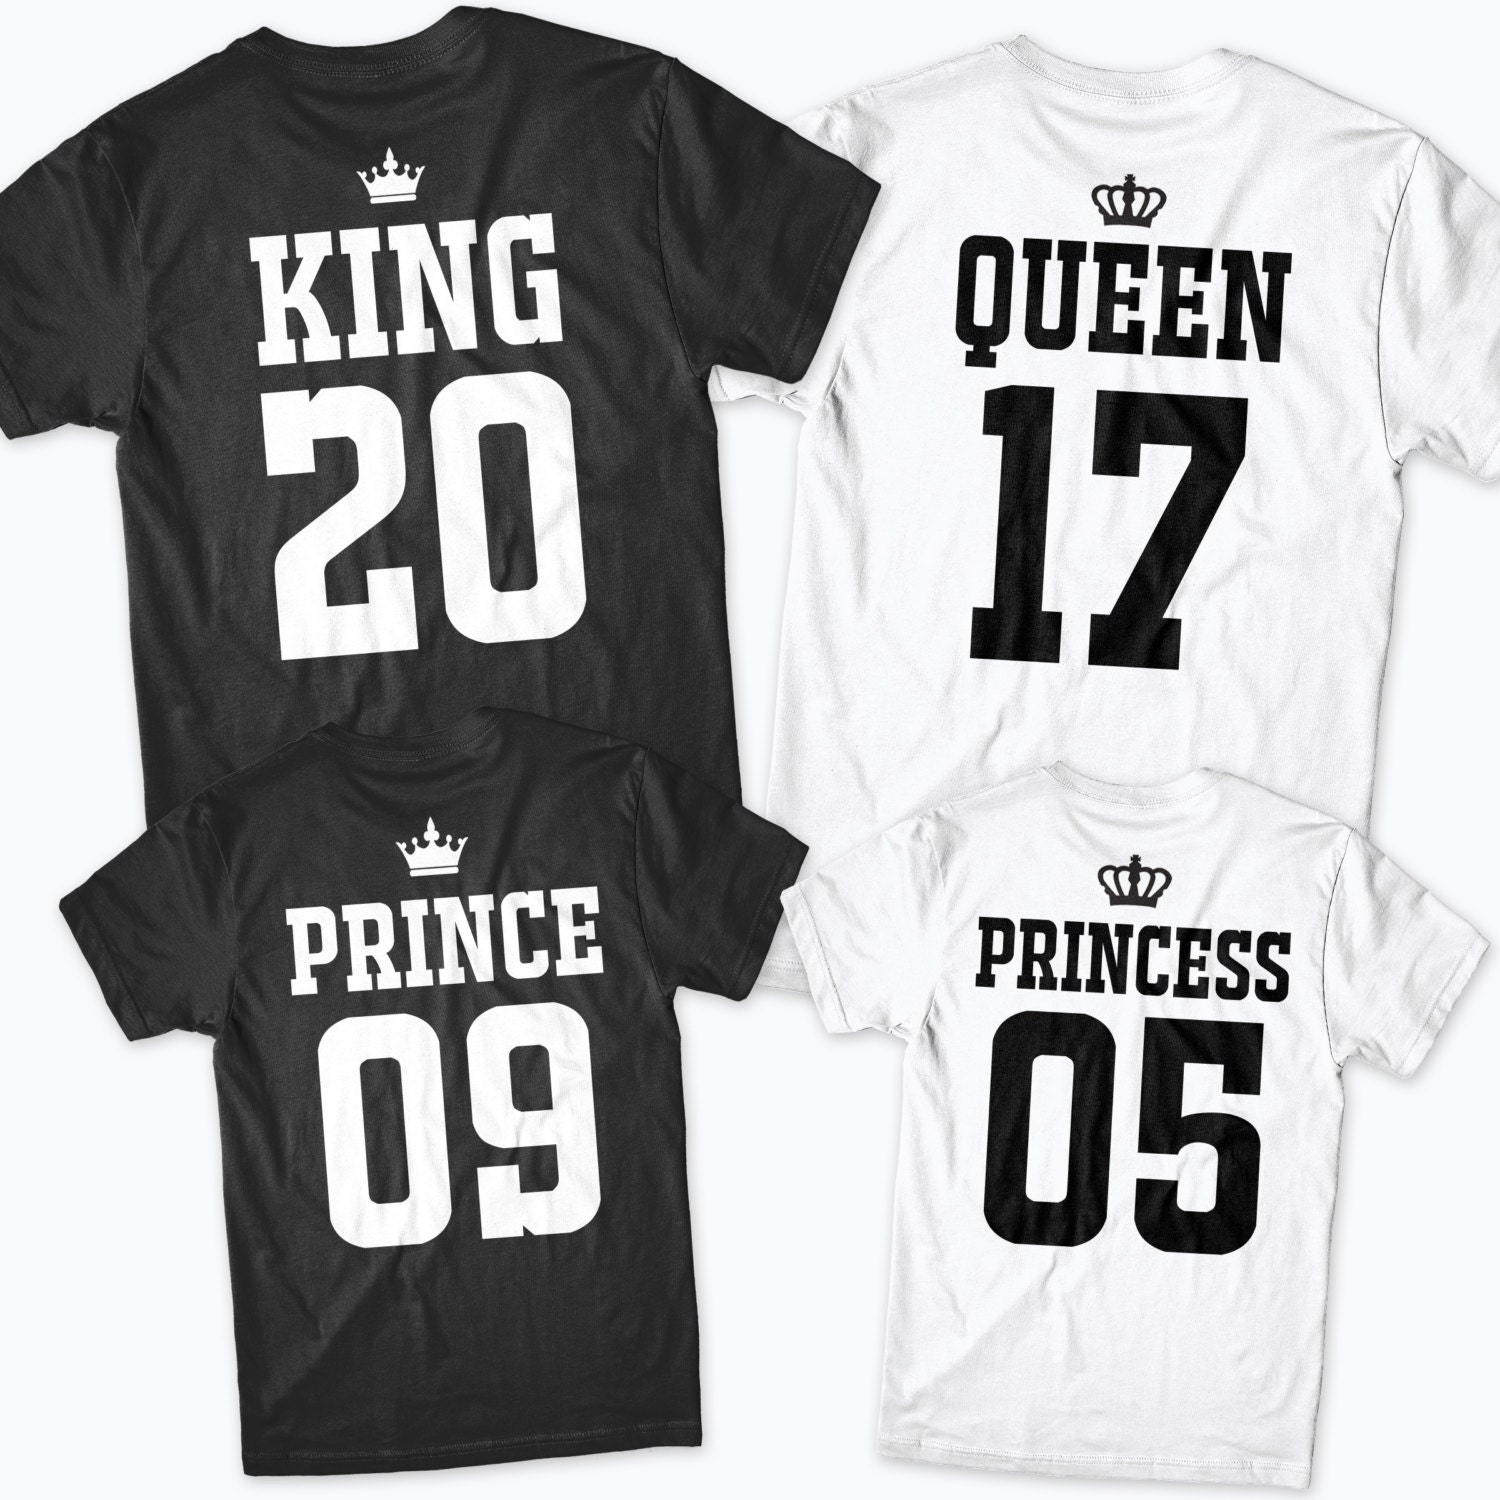 king and queen t shirts uk